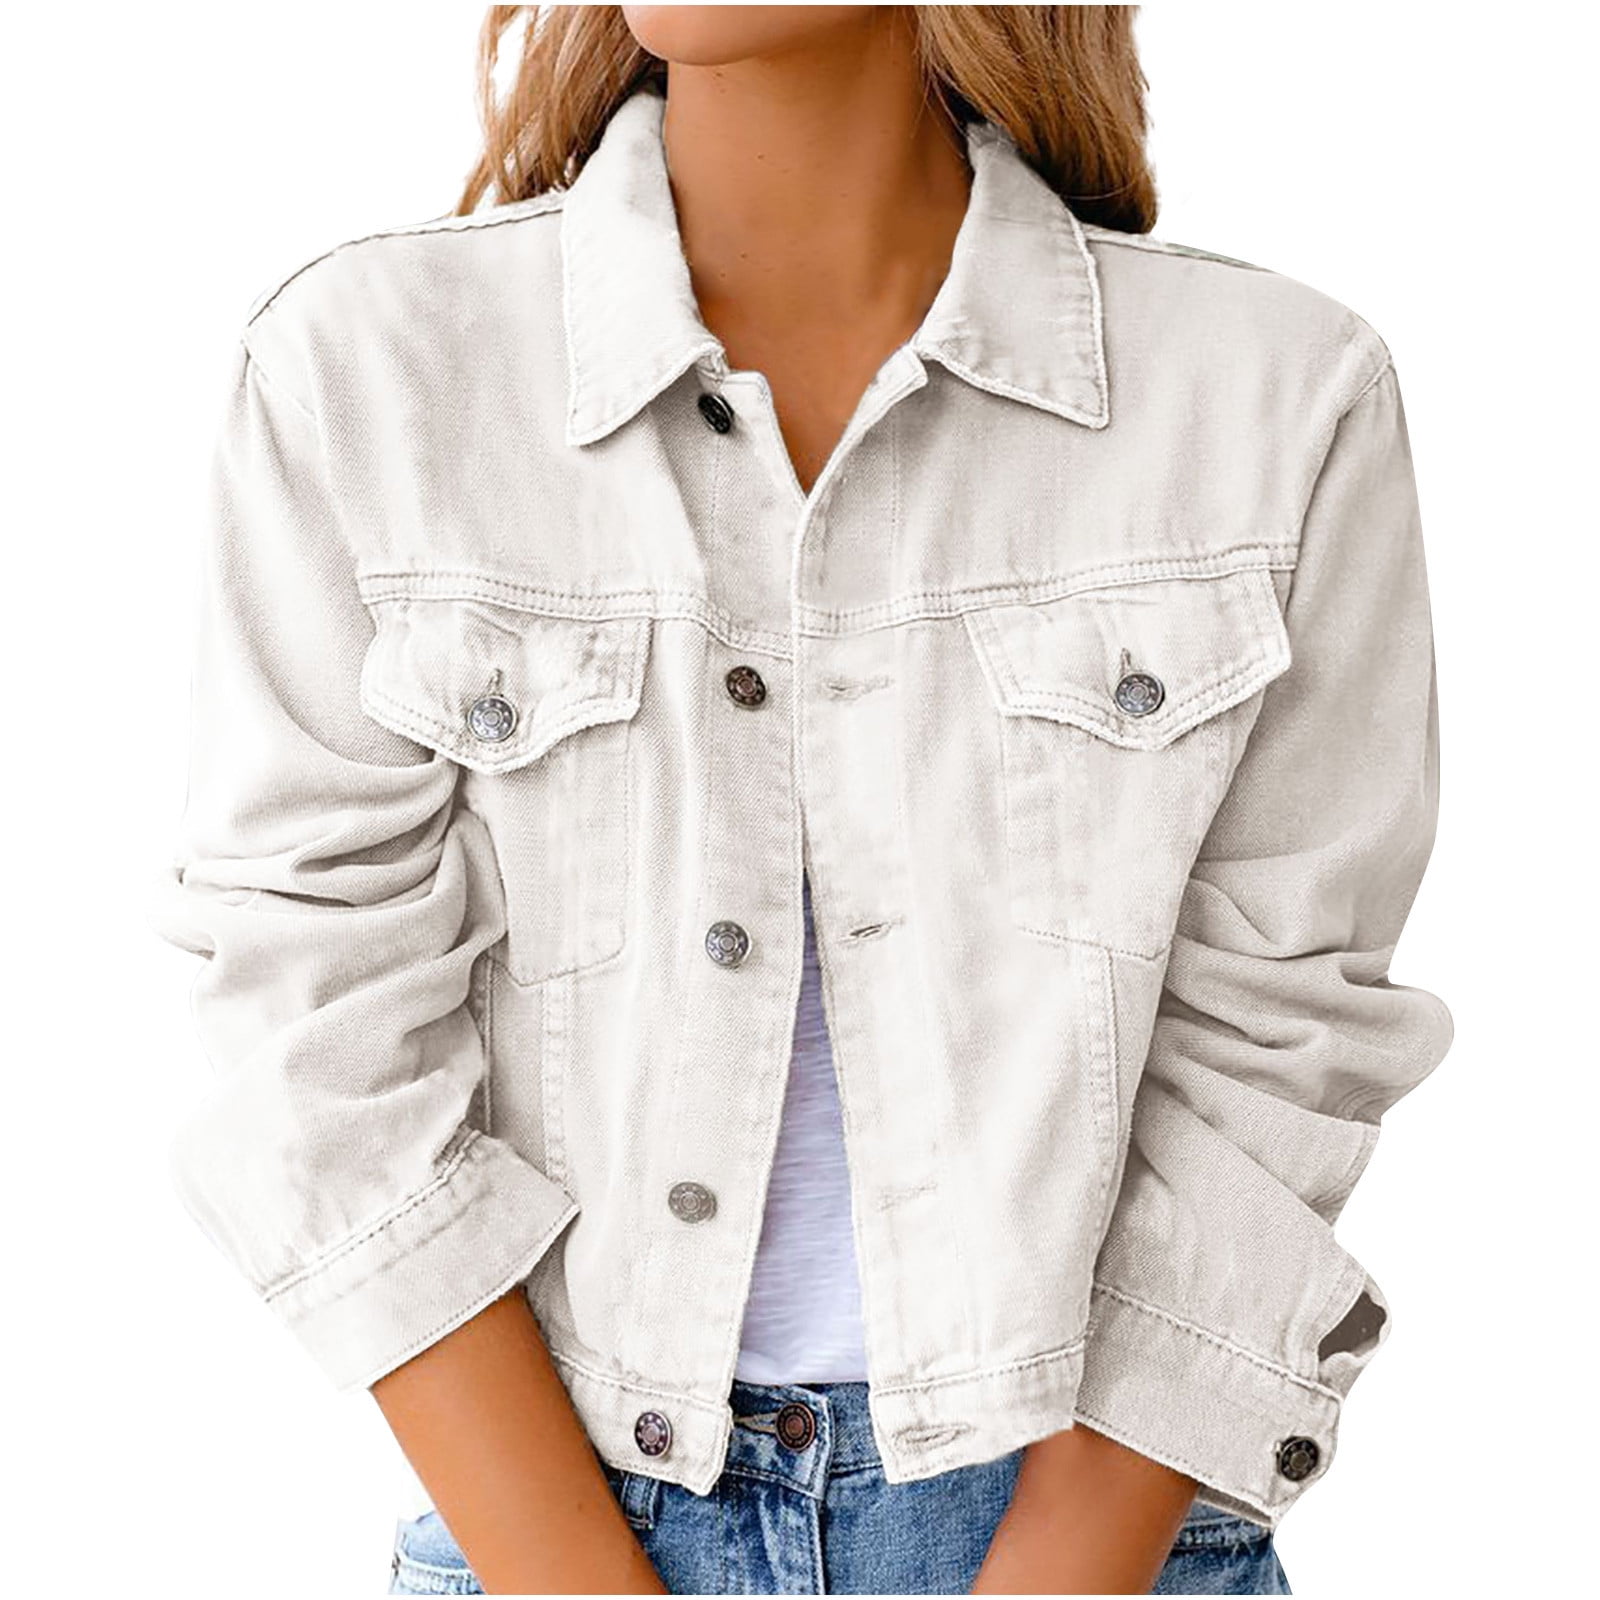 Designer Mens Denim Jacket With Ripped Holes White, Black, Red, Pink Casual  Top For Men And Women Streetwear, Hip Hop, And Cowboy Style Mens Outerwear  From Goodbag118, $14.81 | DHgate.Com